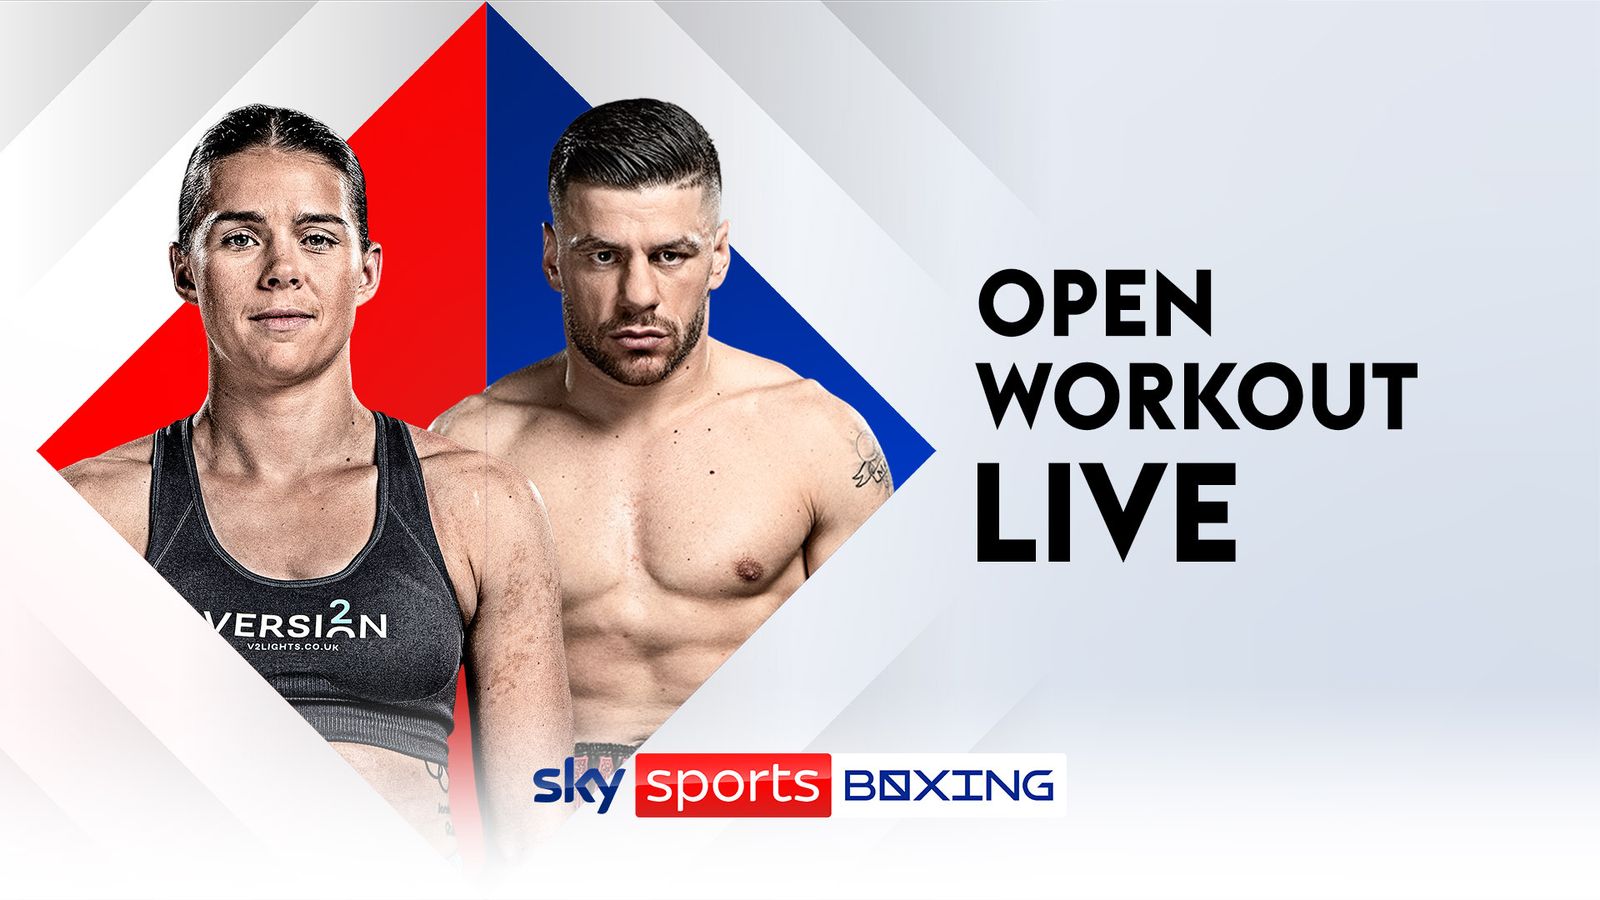 Savannah Marshall vs Femke Hermans Watch free live stream of the public work-out featuring Florian Marku Boxing News Sky Sports